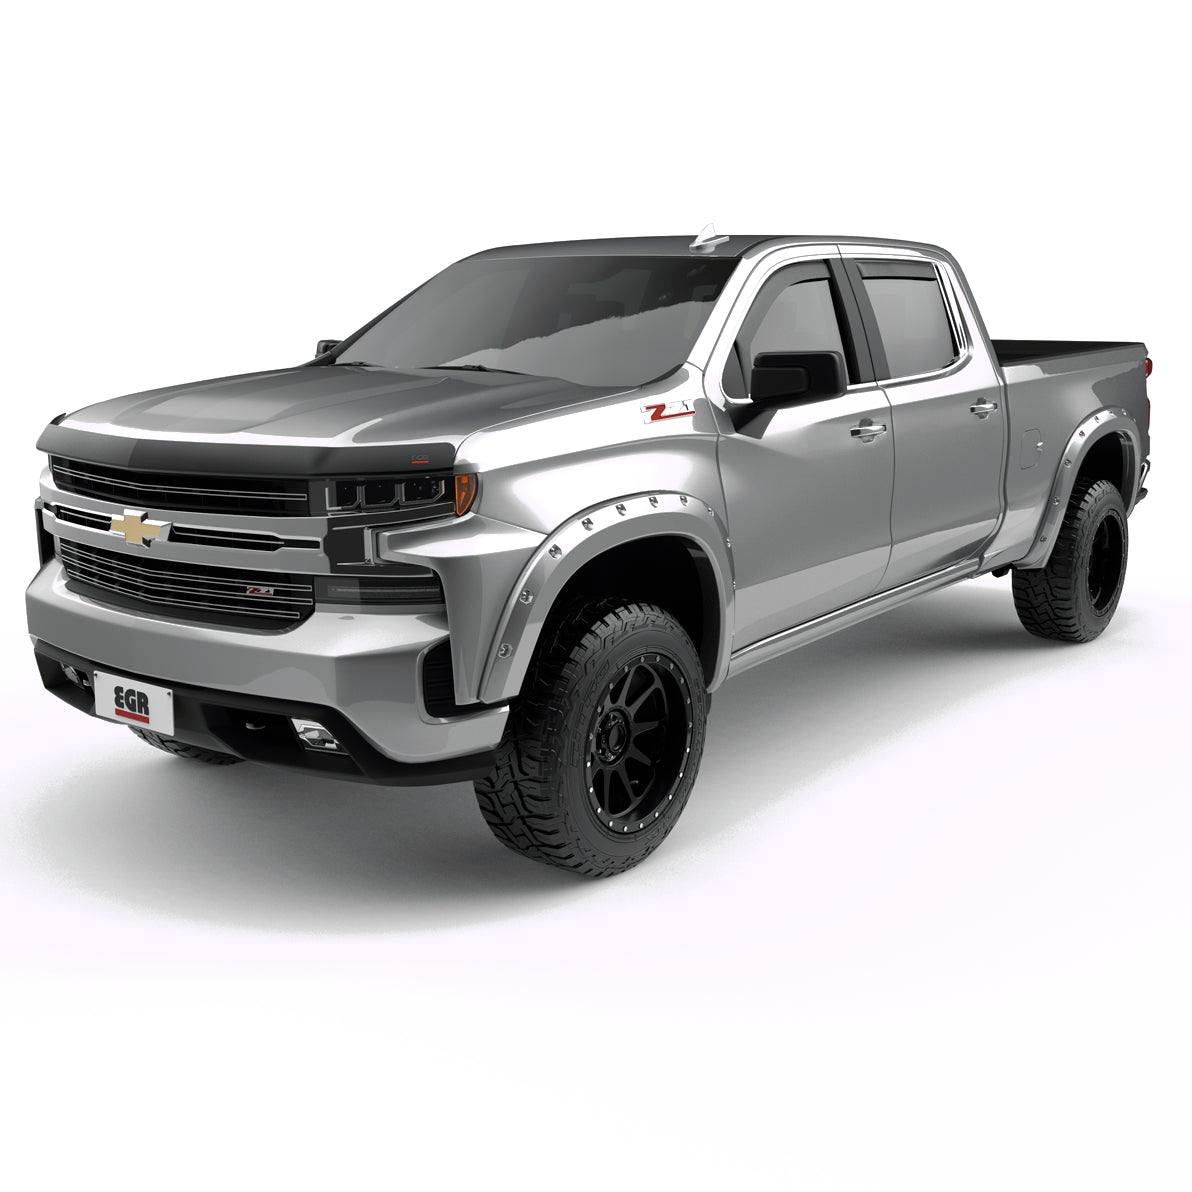 EGR Traditional Bolt-on look Fender Flares 19-22 Chevrolet Silverado 1500 Painted to Code Silver Metallic set of 4